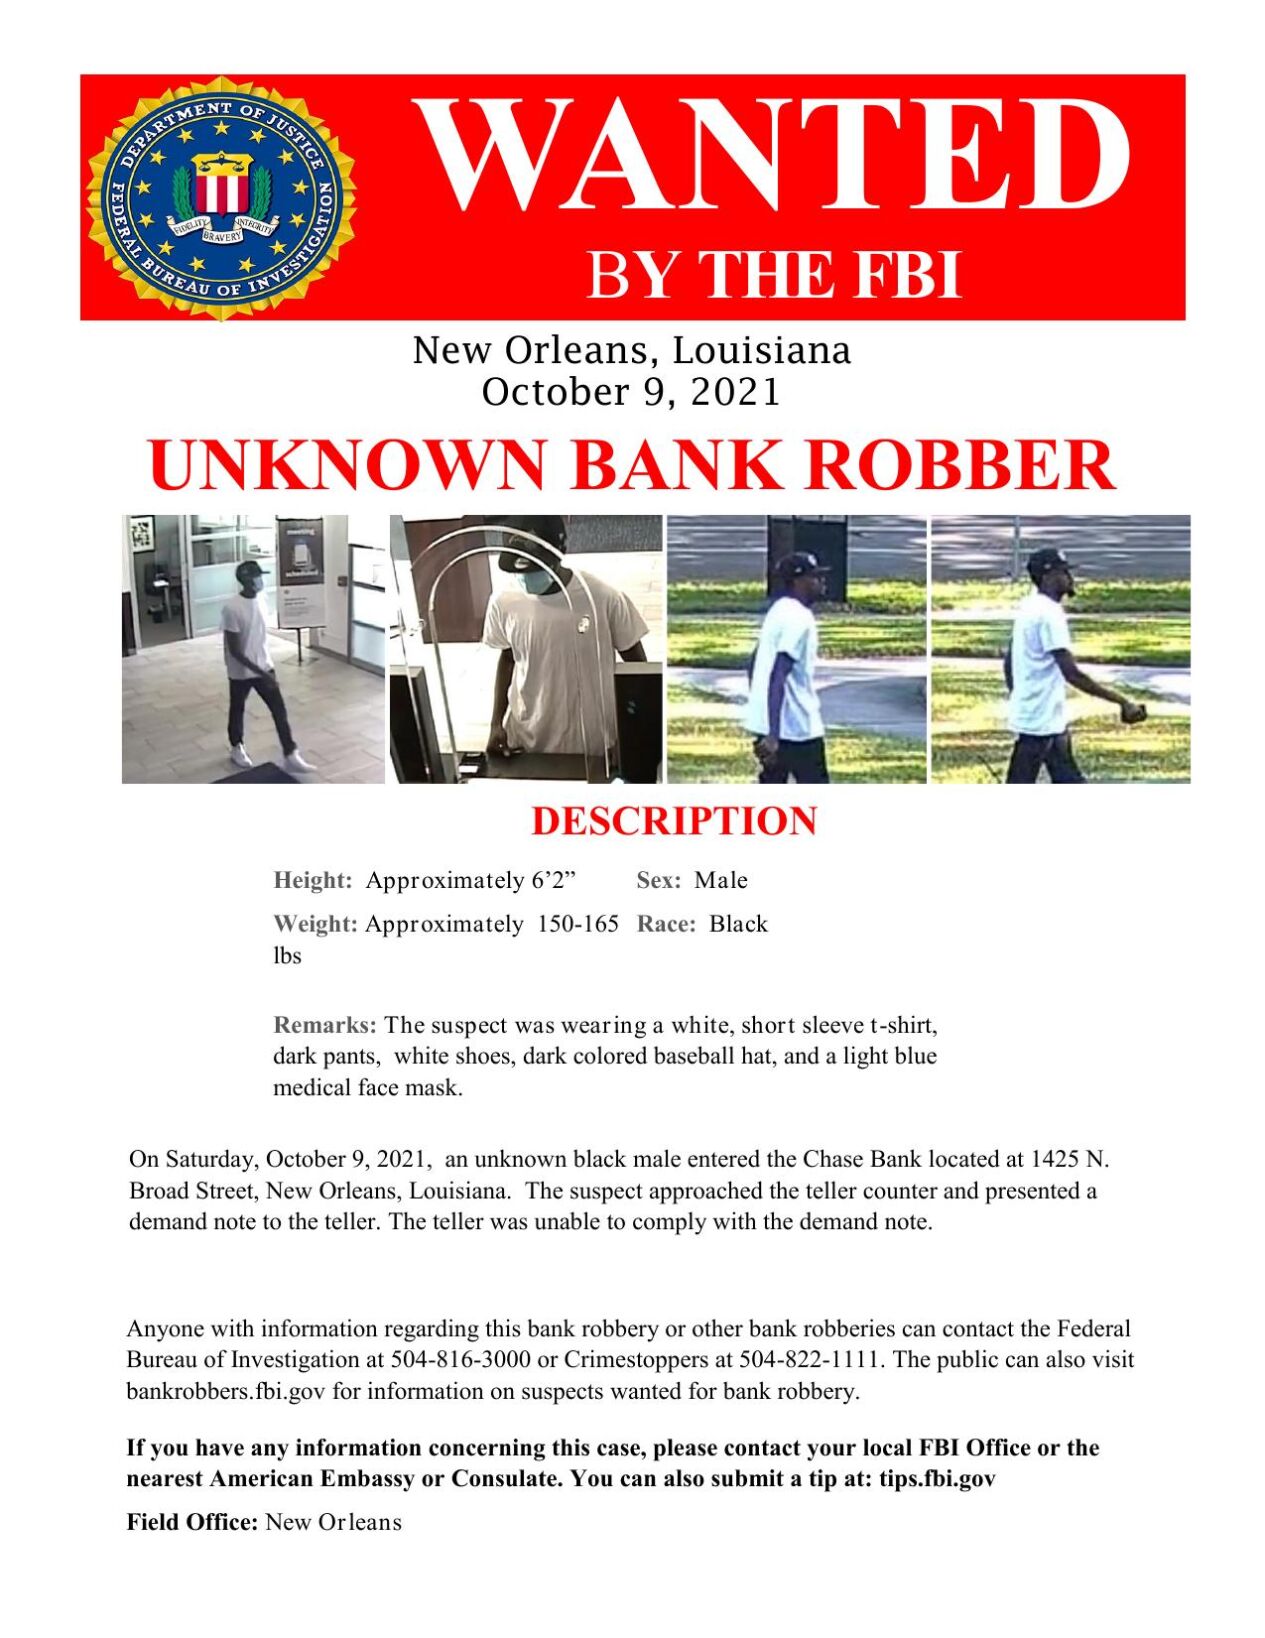 Wanted poster for bank robber October 9, 2021